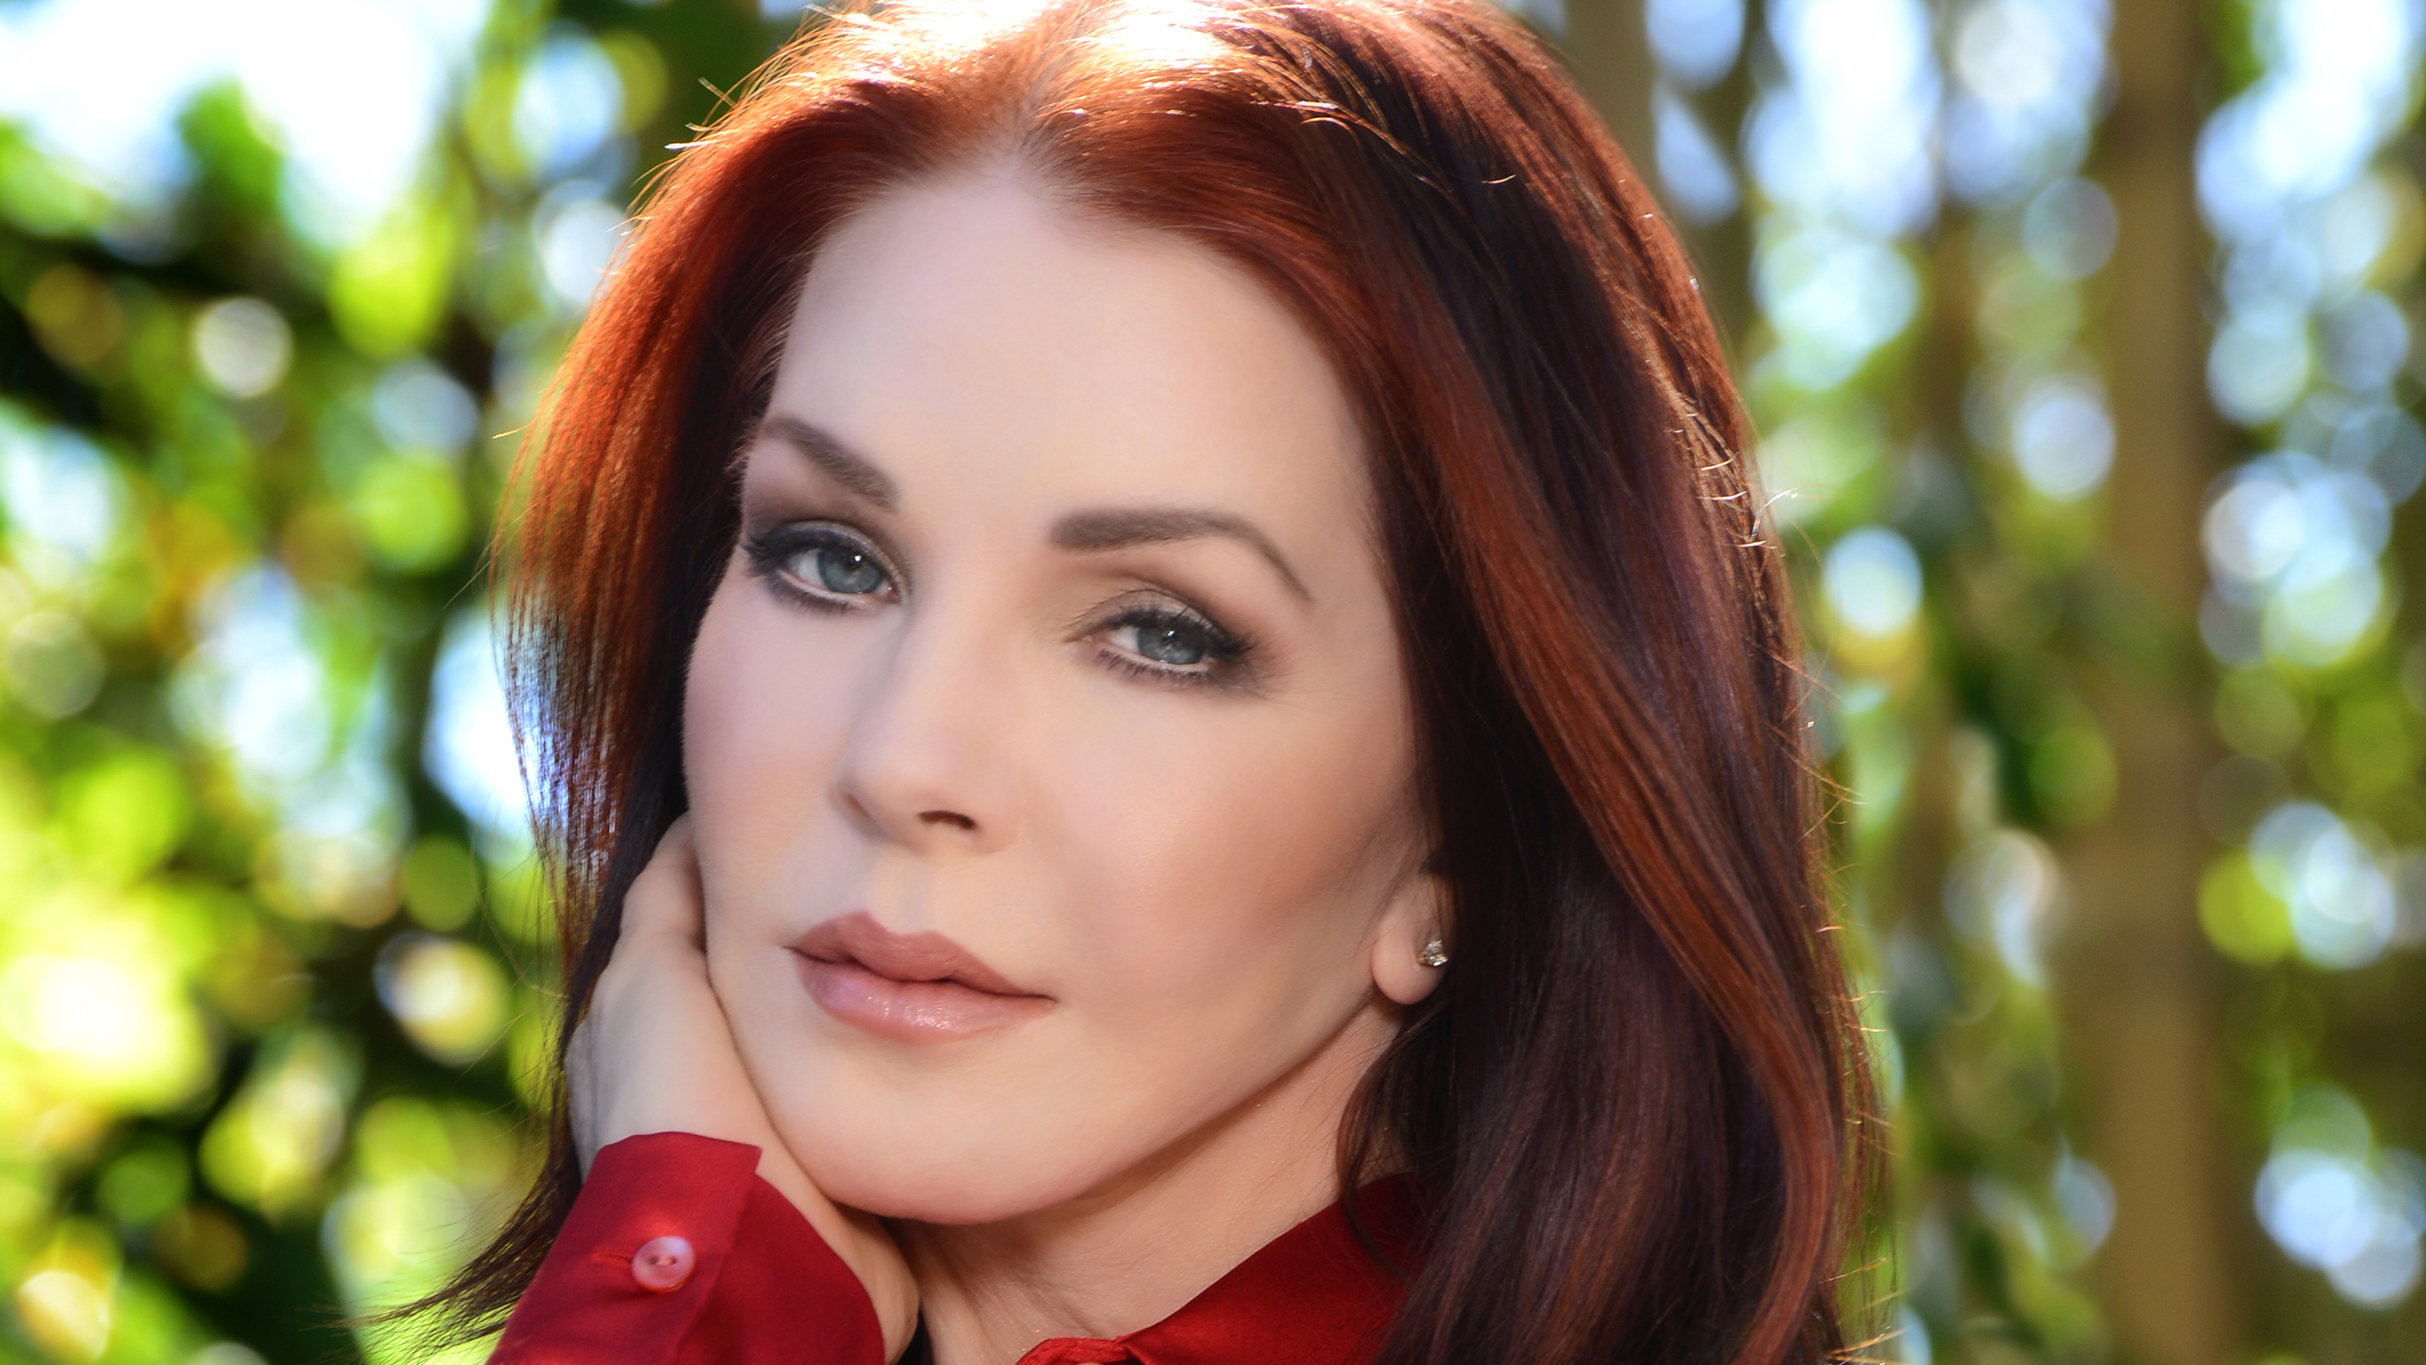 An Intimate Evening with Priscilla Presley